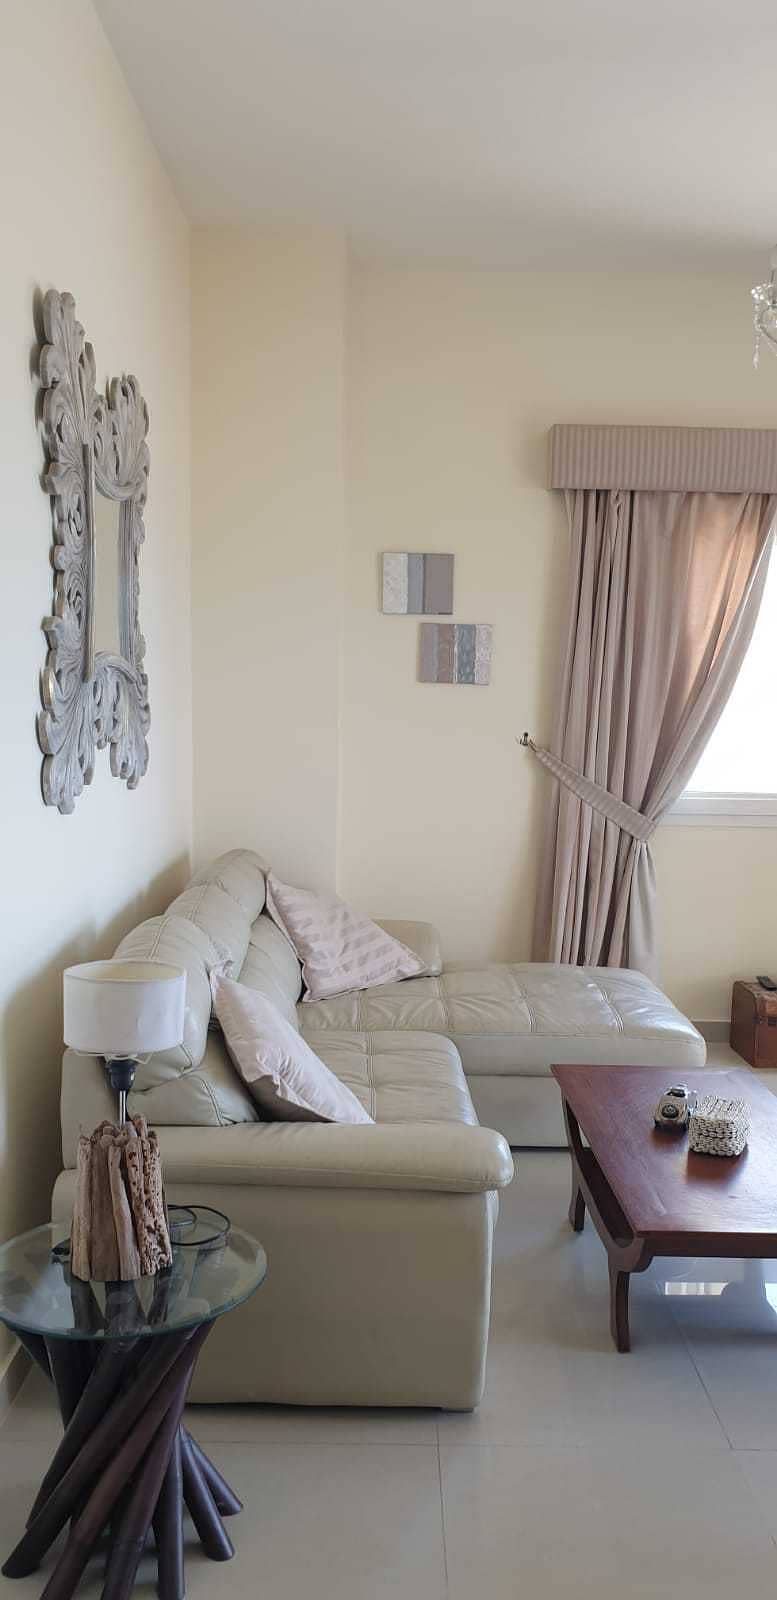 For sale fully furnished 1 bedroom seaview flat